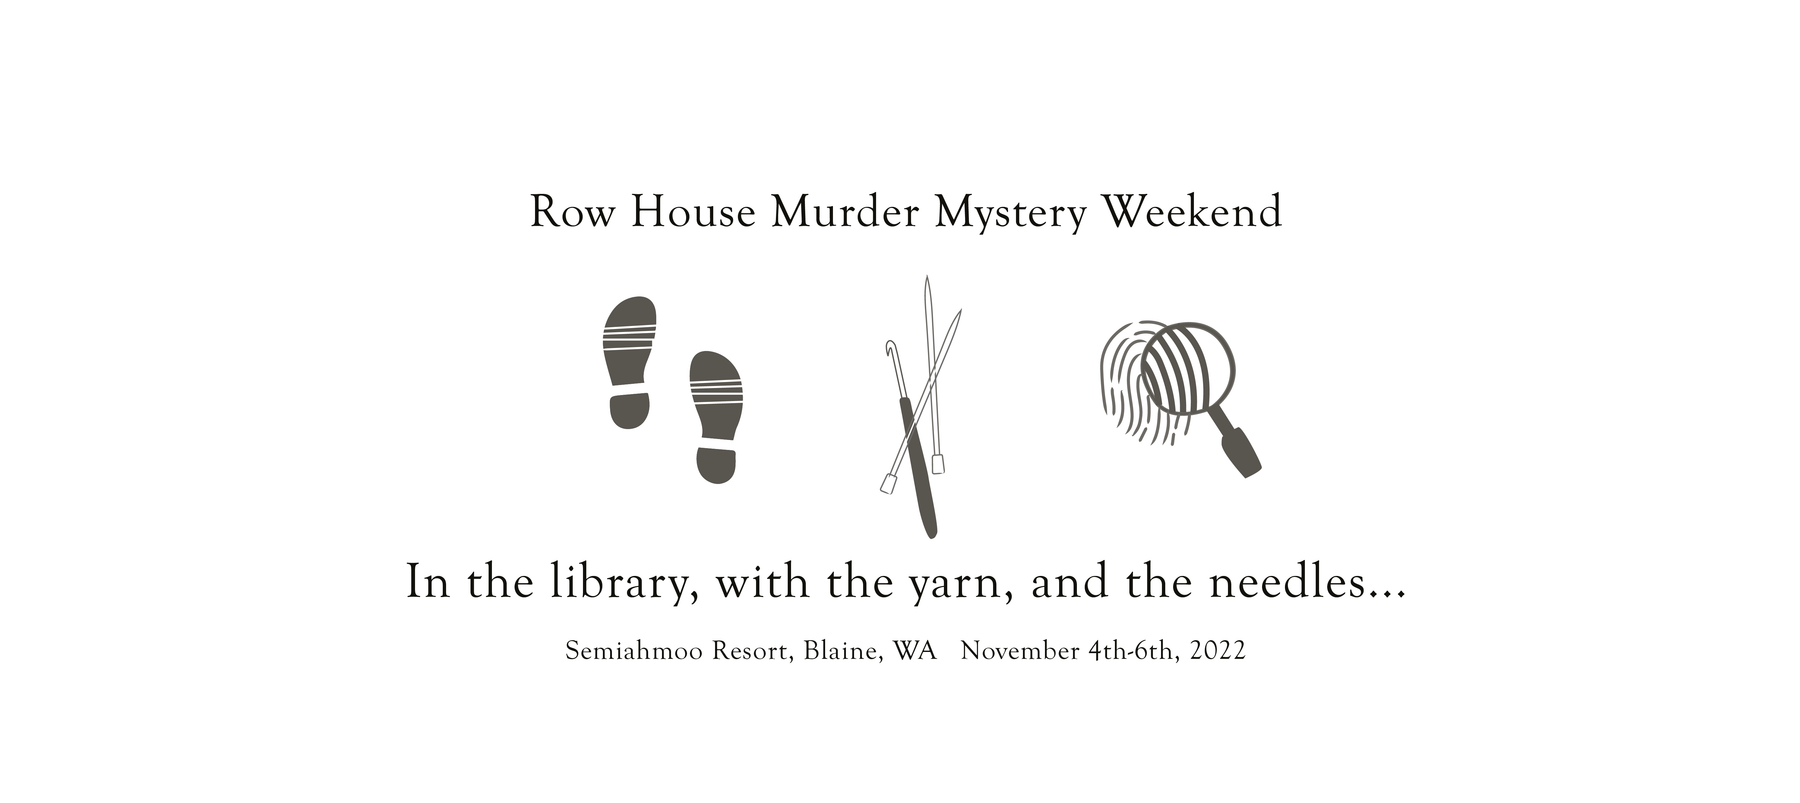 Join Us for a Murder Mystery Weekend Knitting Event